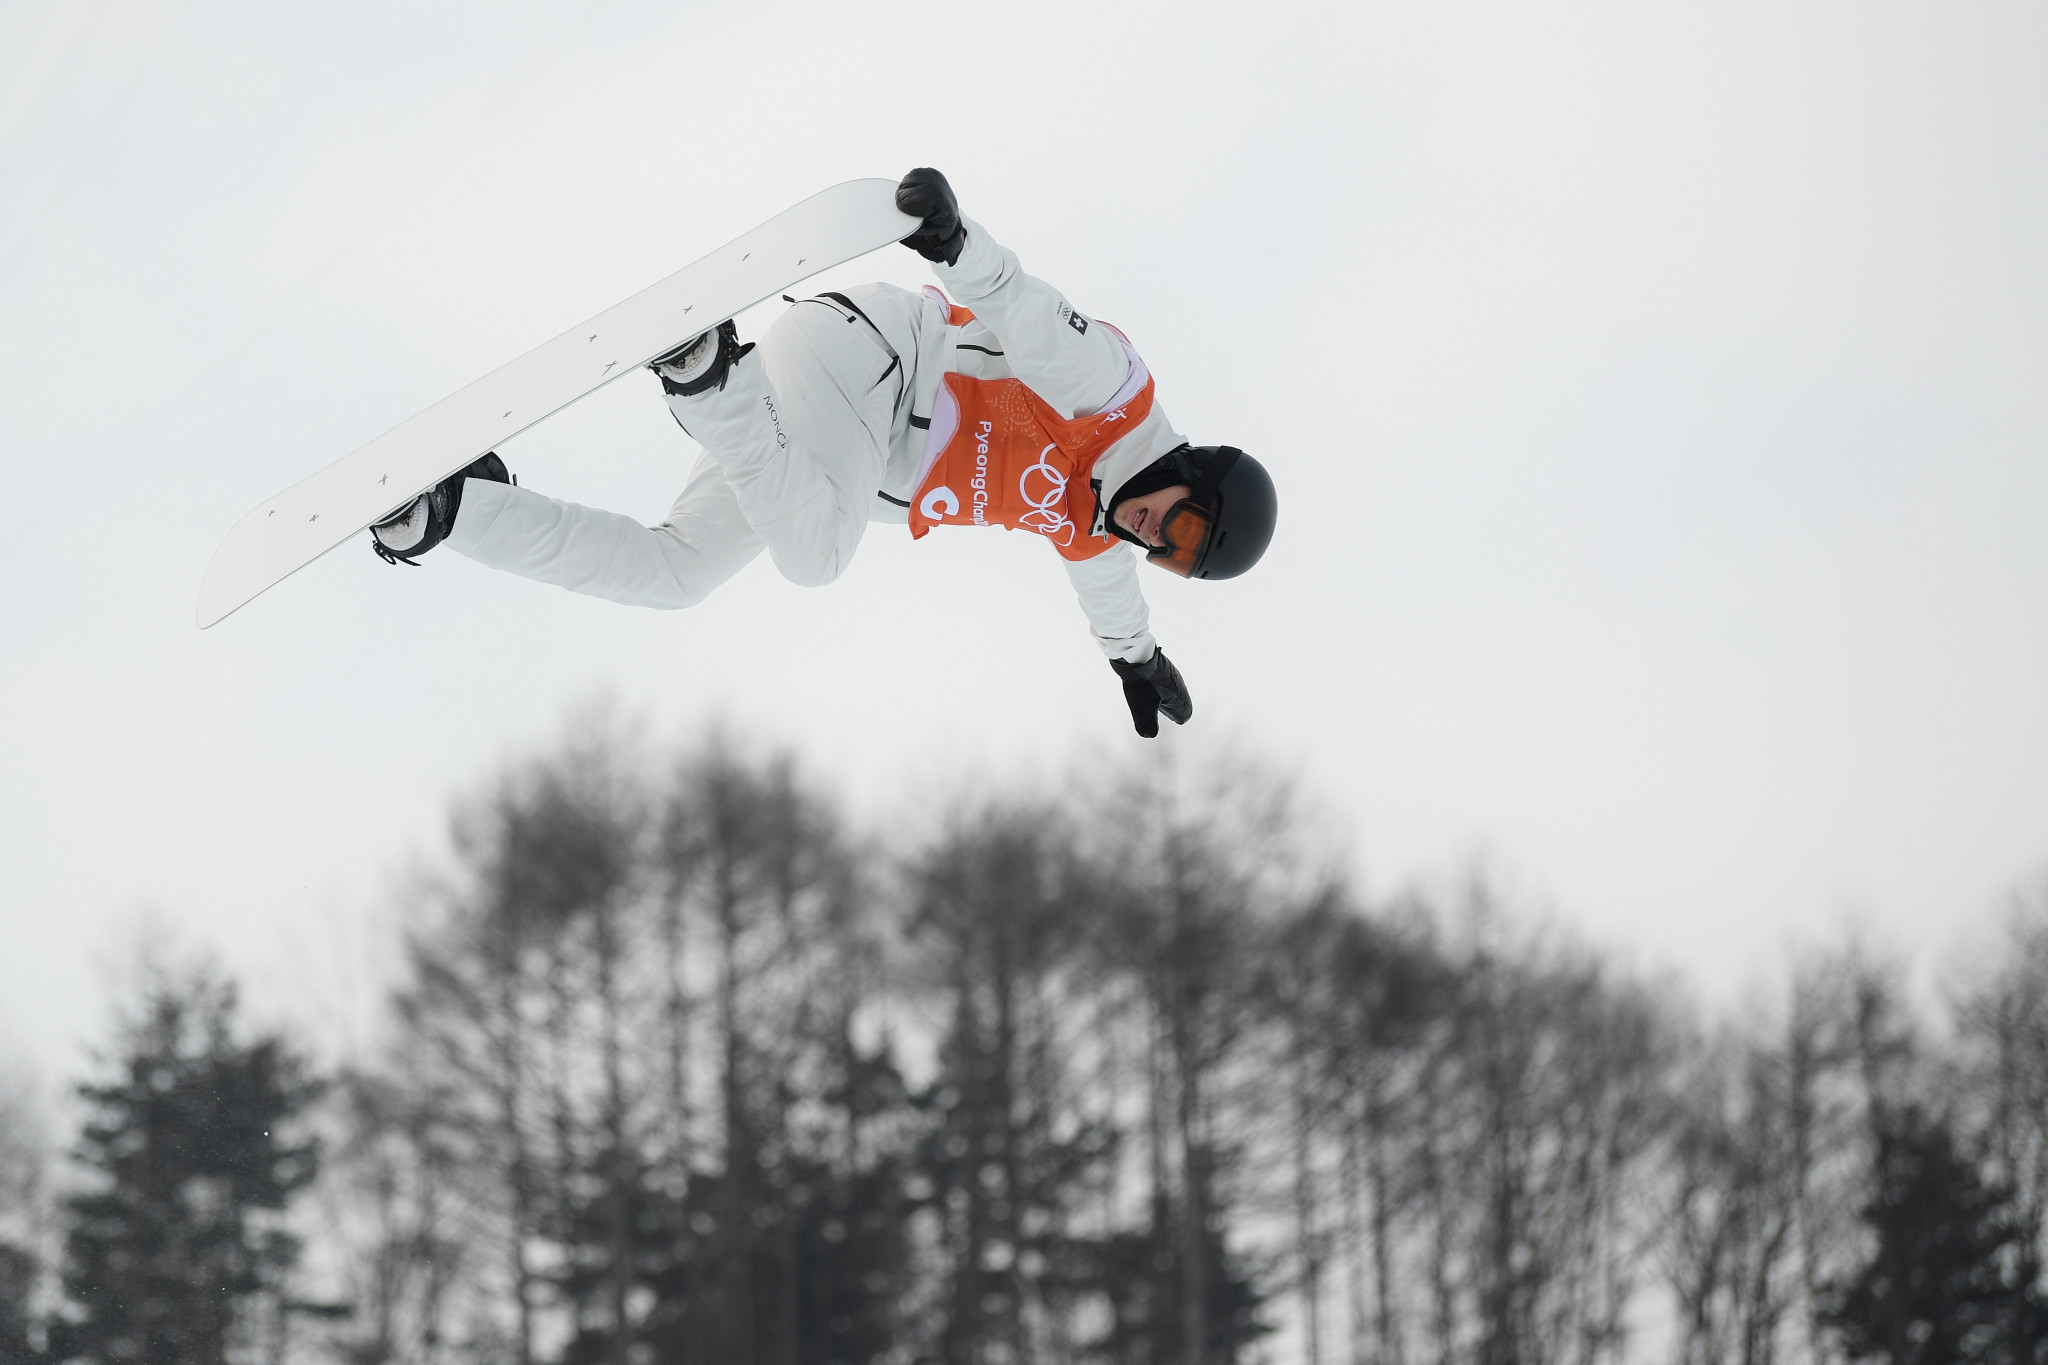 Snowboard Halfpipe World Cup season to continue in Secret Garden without round one winners